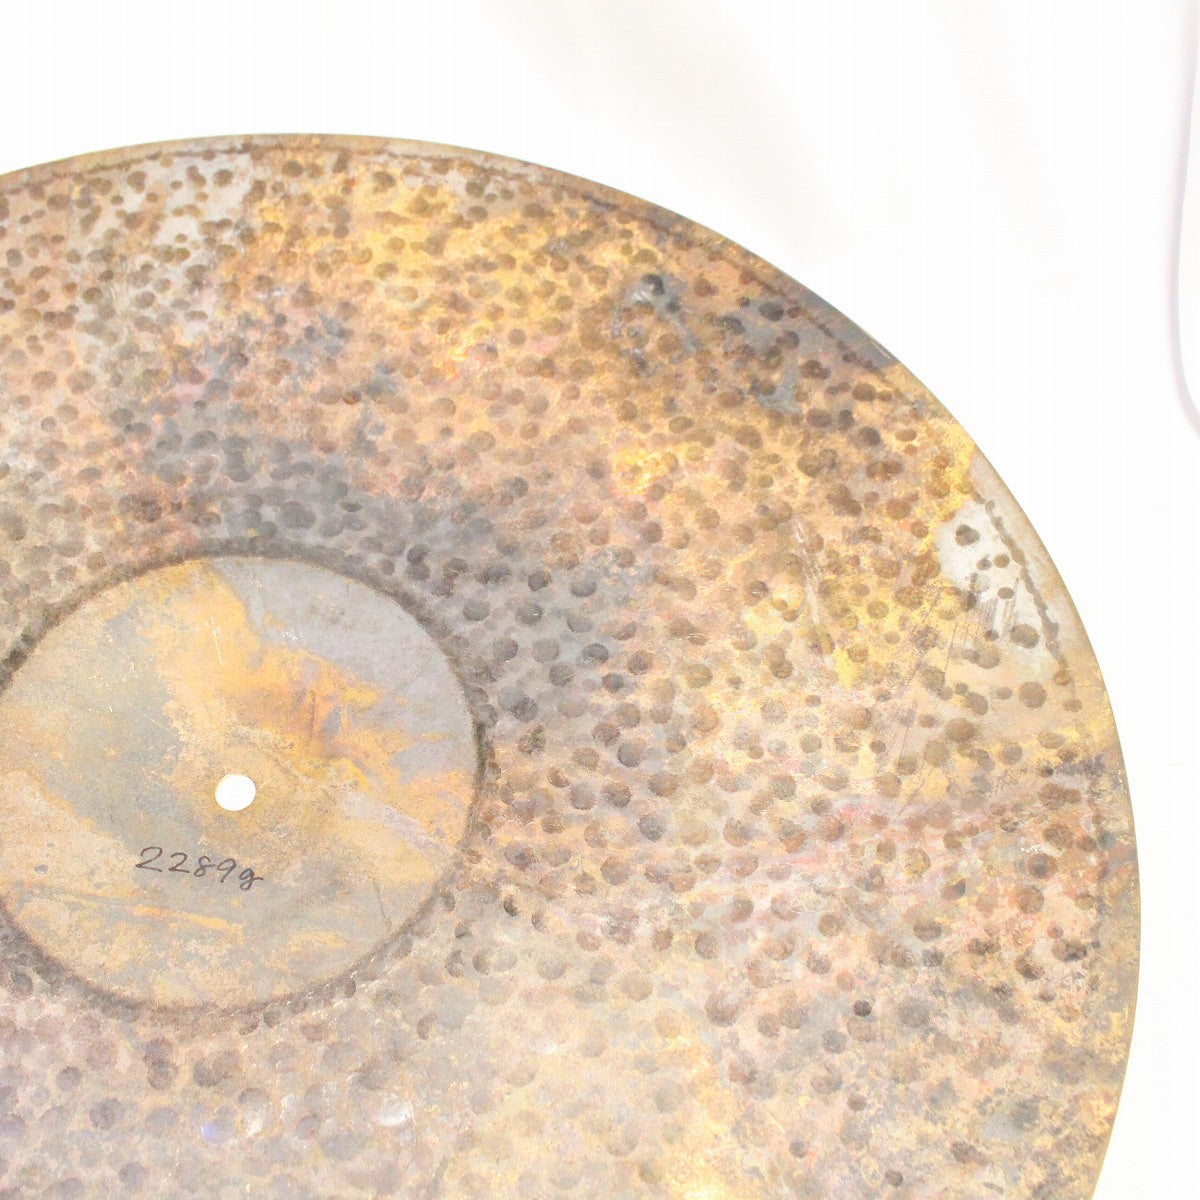 USED MEINL / Byzance Extra Dry Thin Ride 22" 2289g Meinl Ride Cymbal [08]